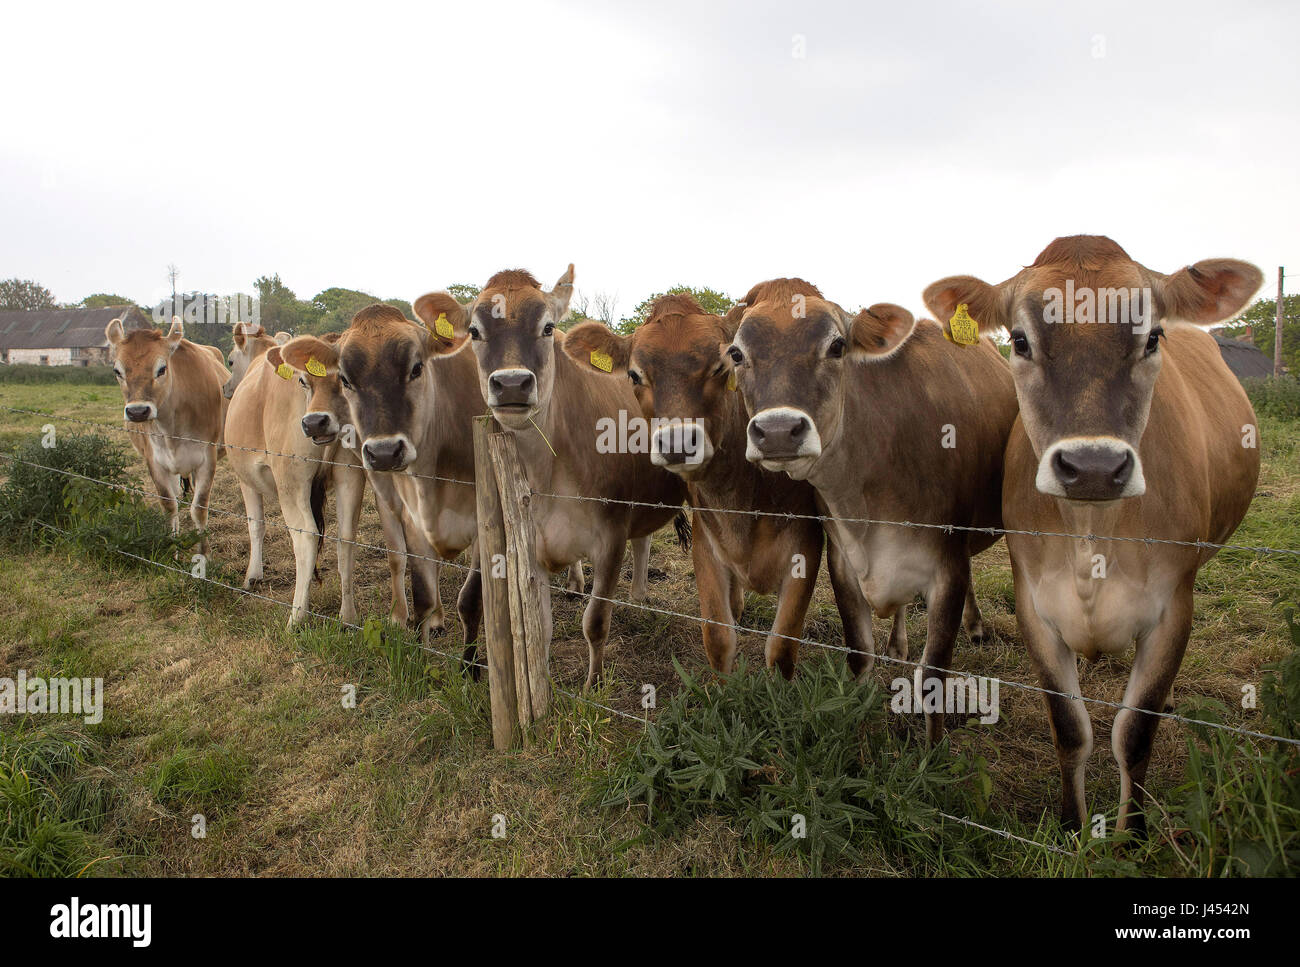 young jersey cow standing in grassy meadow Stock Photo - Alamy